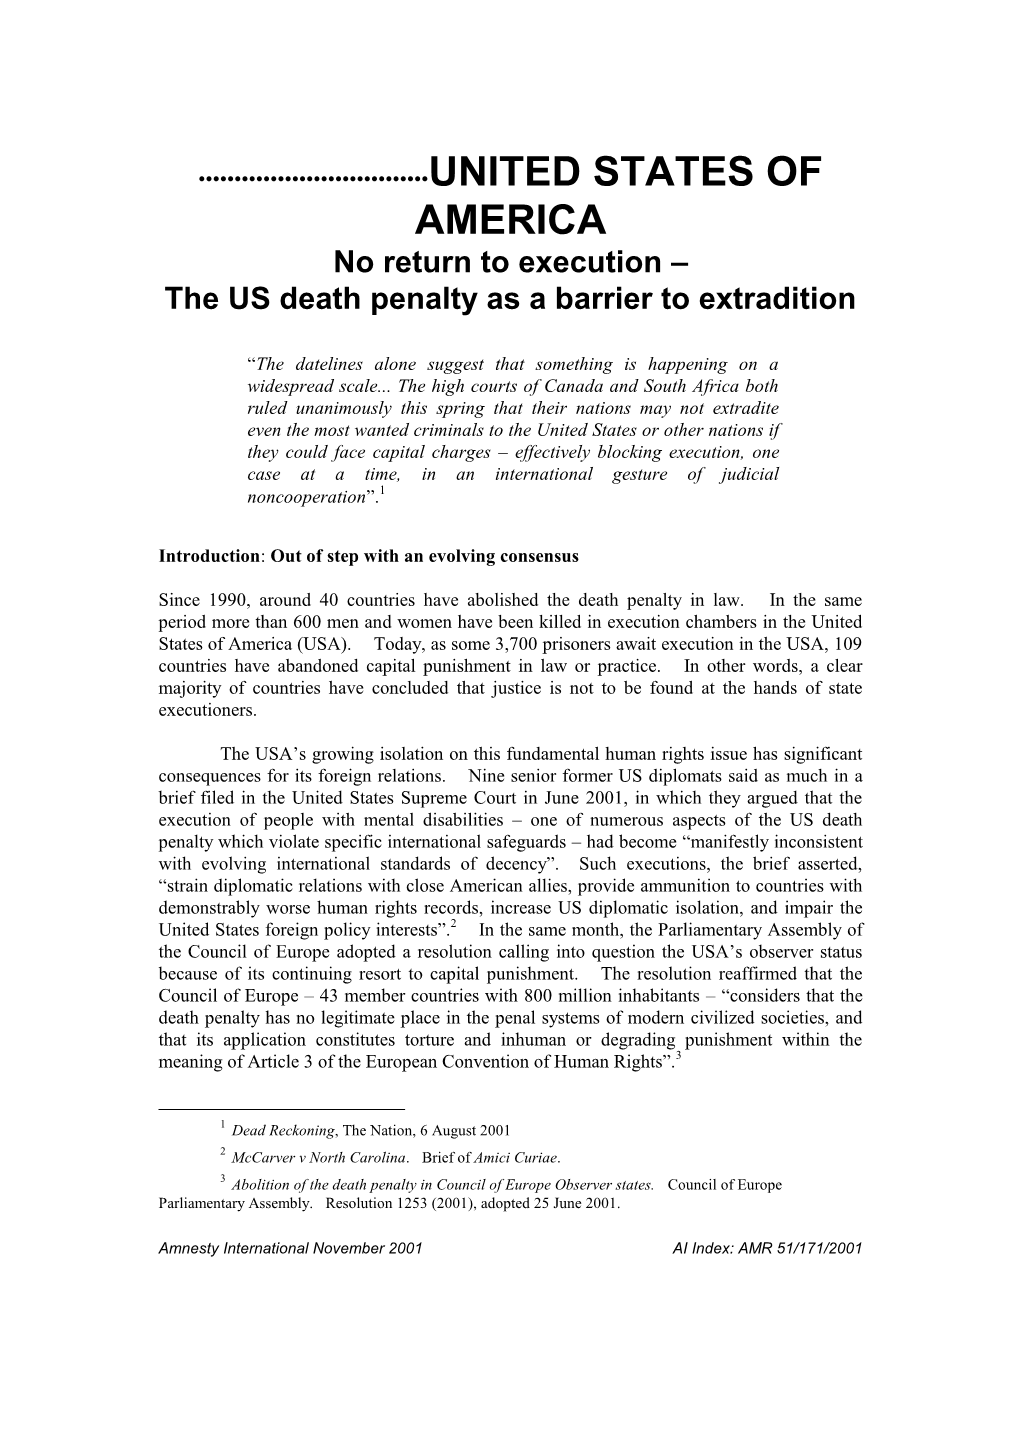 AMERICA No Return to Execution – the US Death Penalty As a Barrier to Extradition